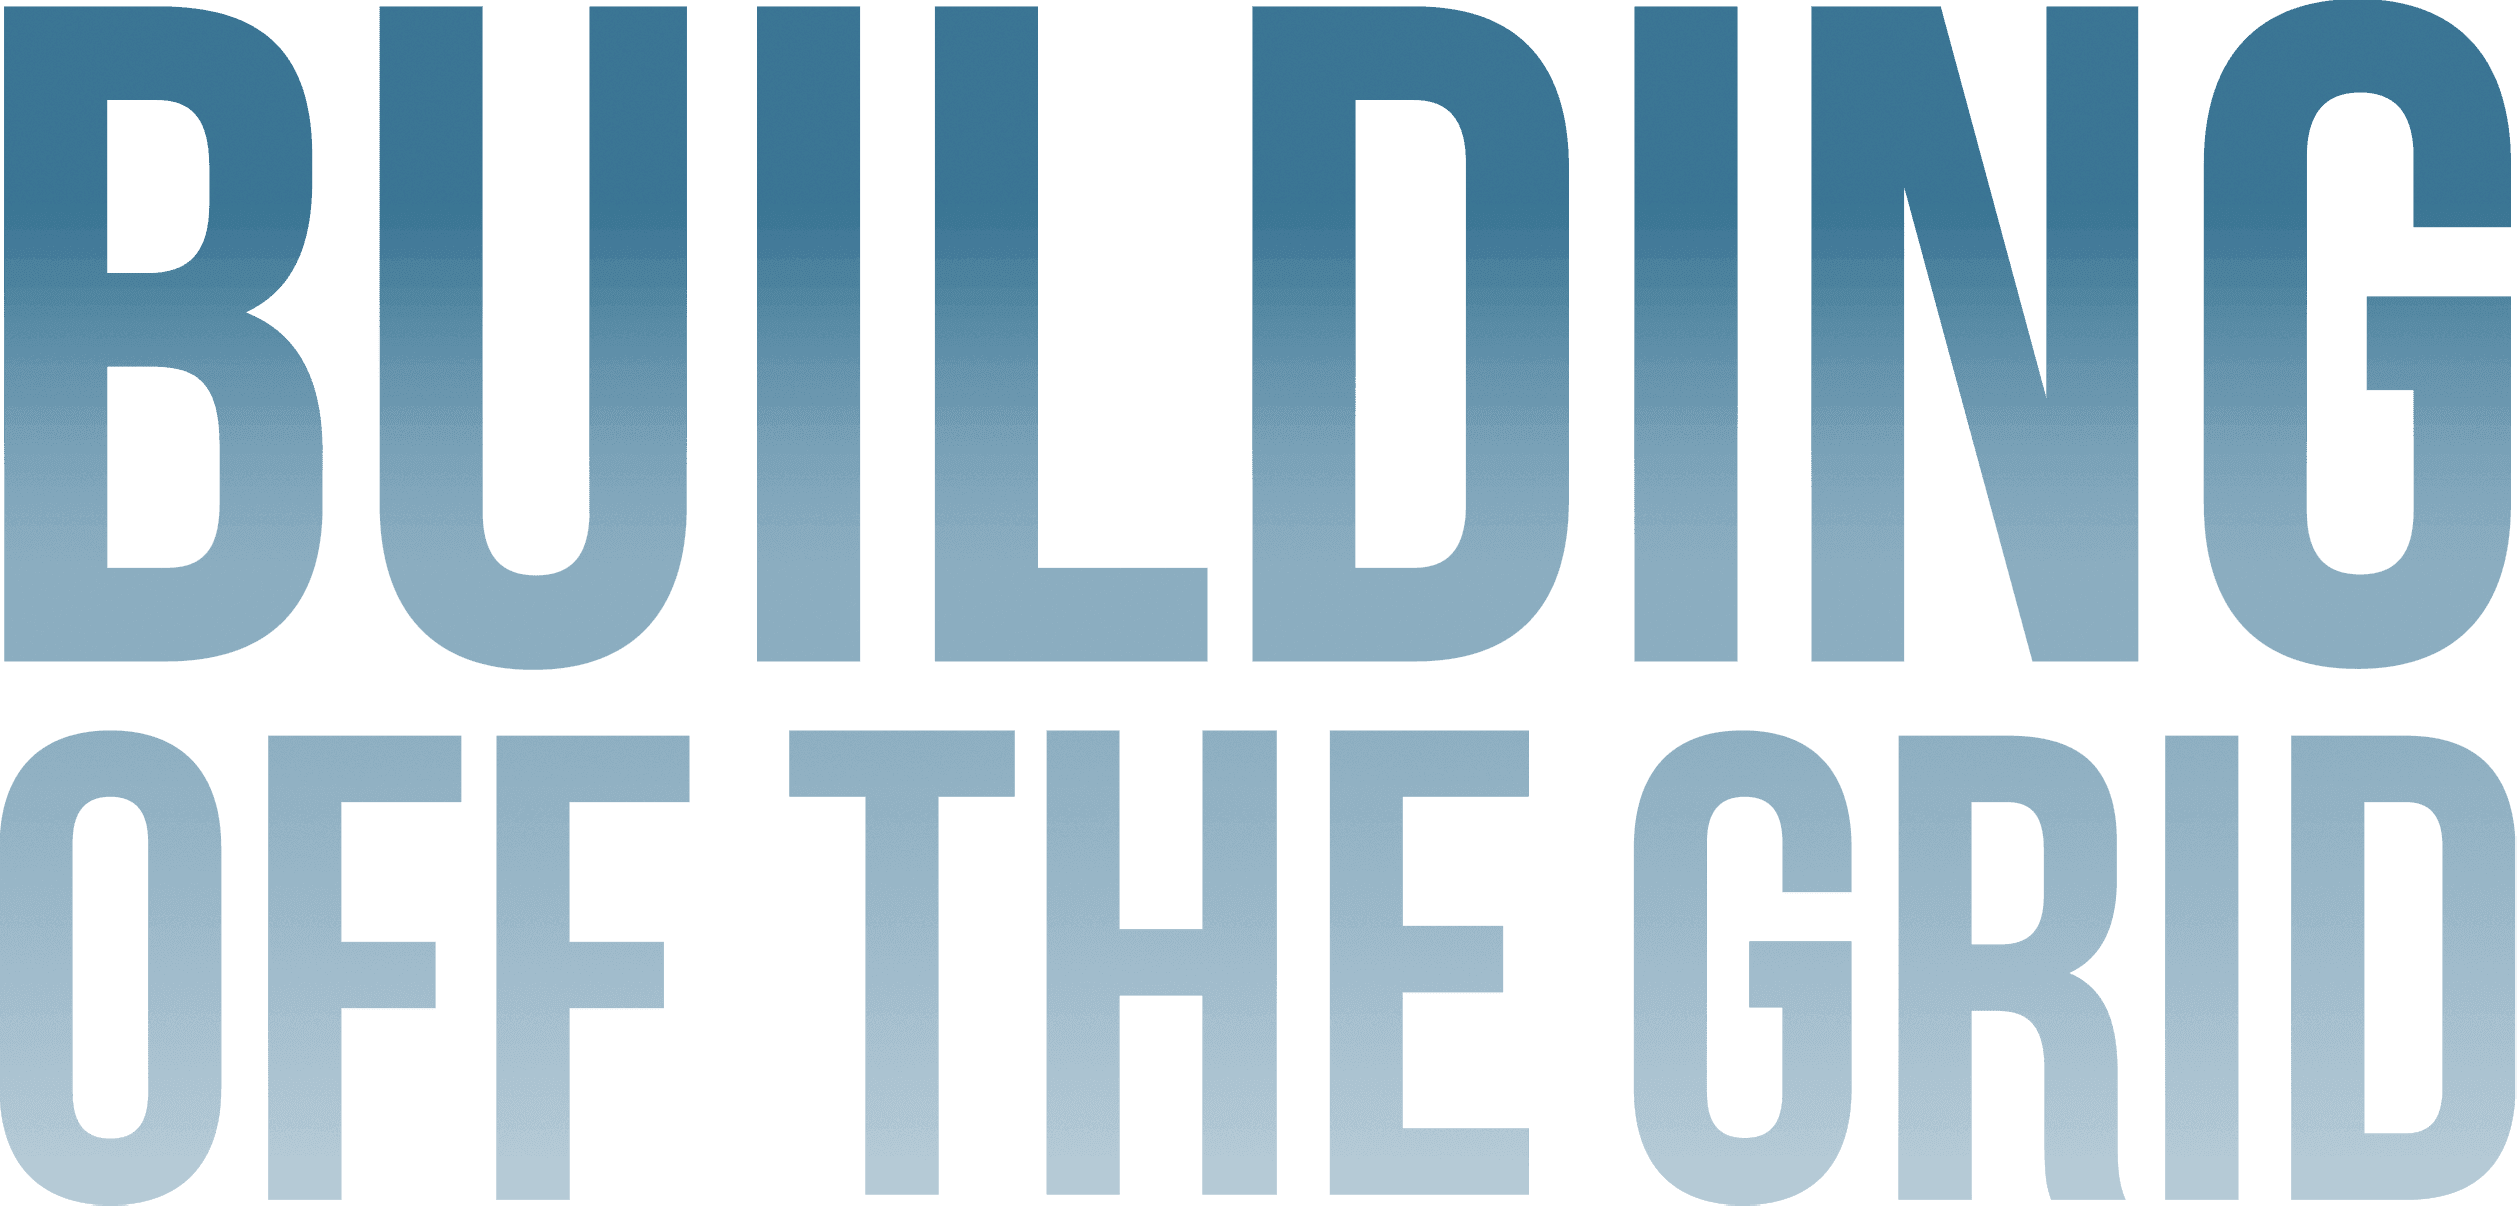 Building Off the Grid logo